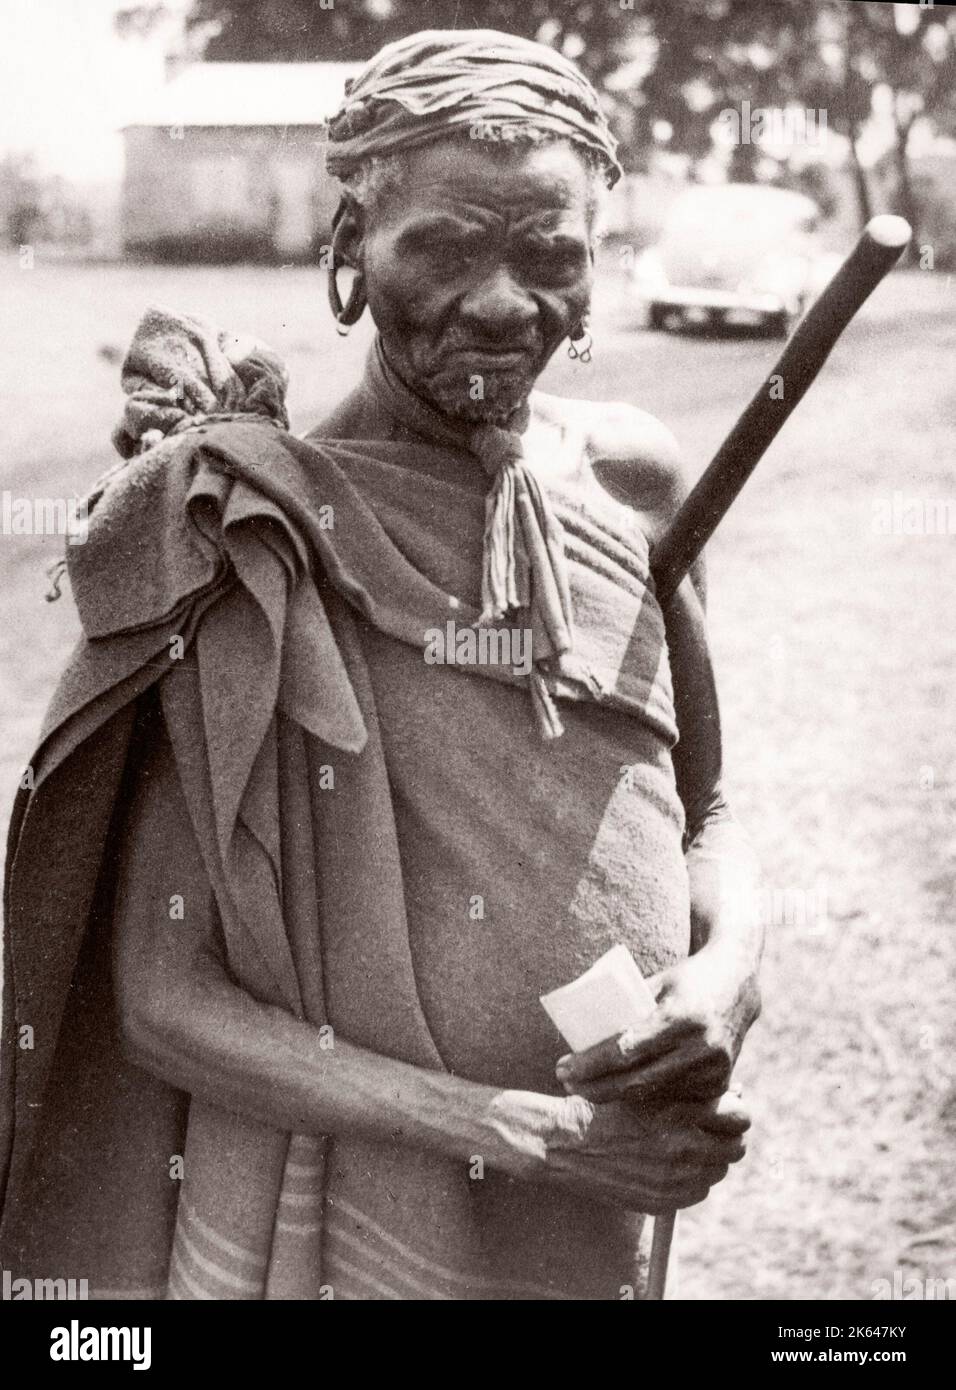 1940s East Africa - elderly Kikuyu man, Kiamba reserve Photograph by a British army recruitment officer stationed in East Africa and the Middle East during World War II Stock Photo